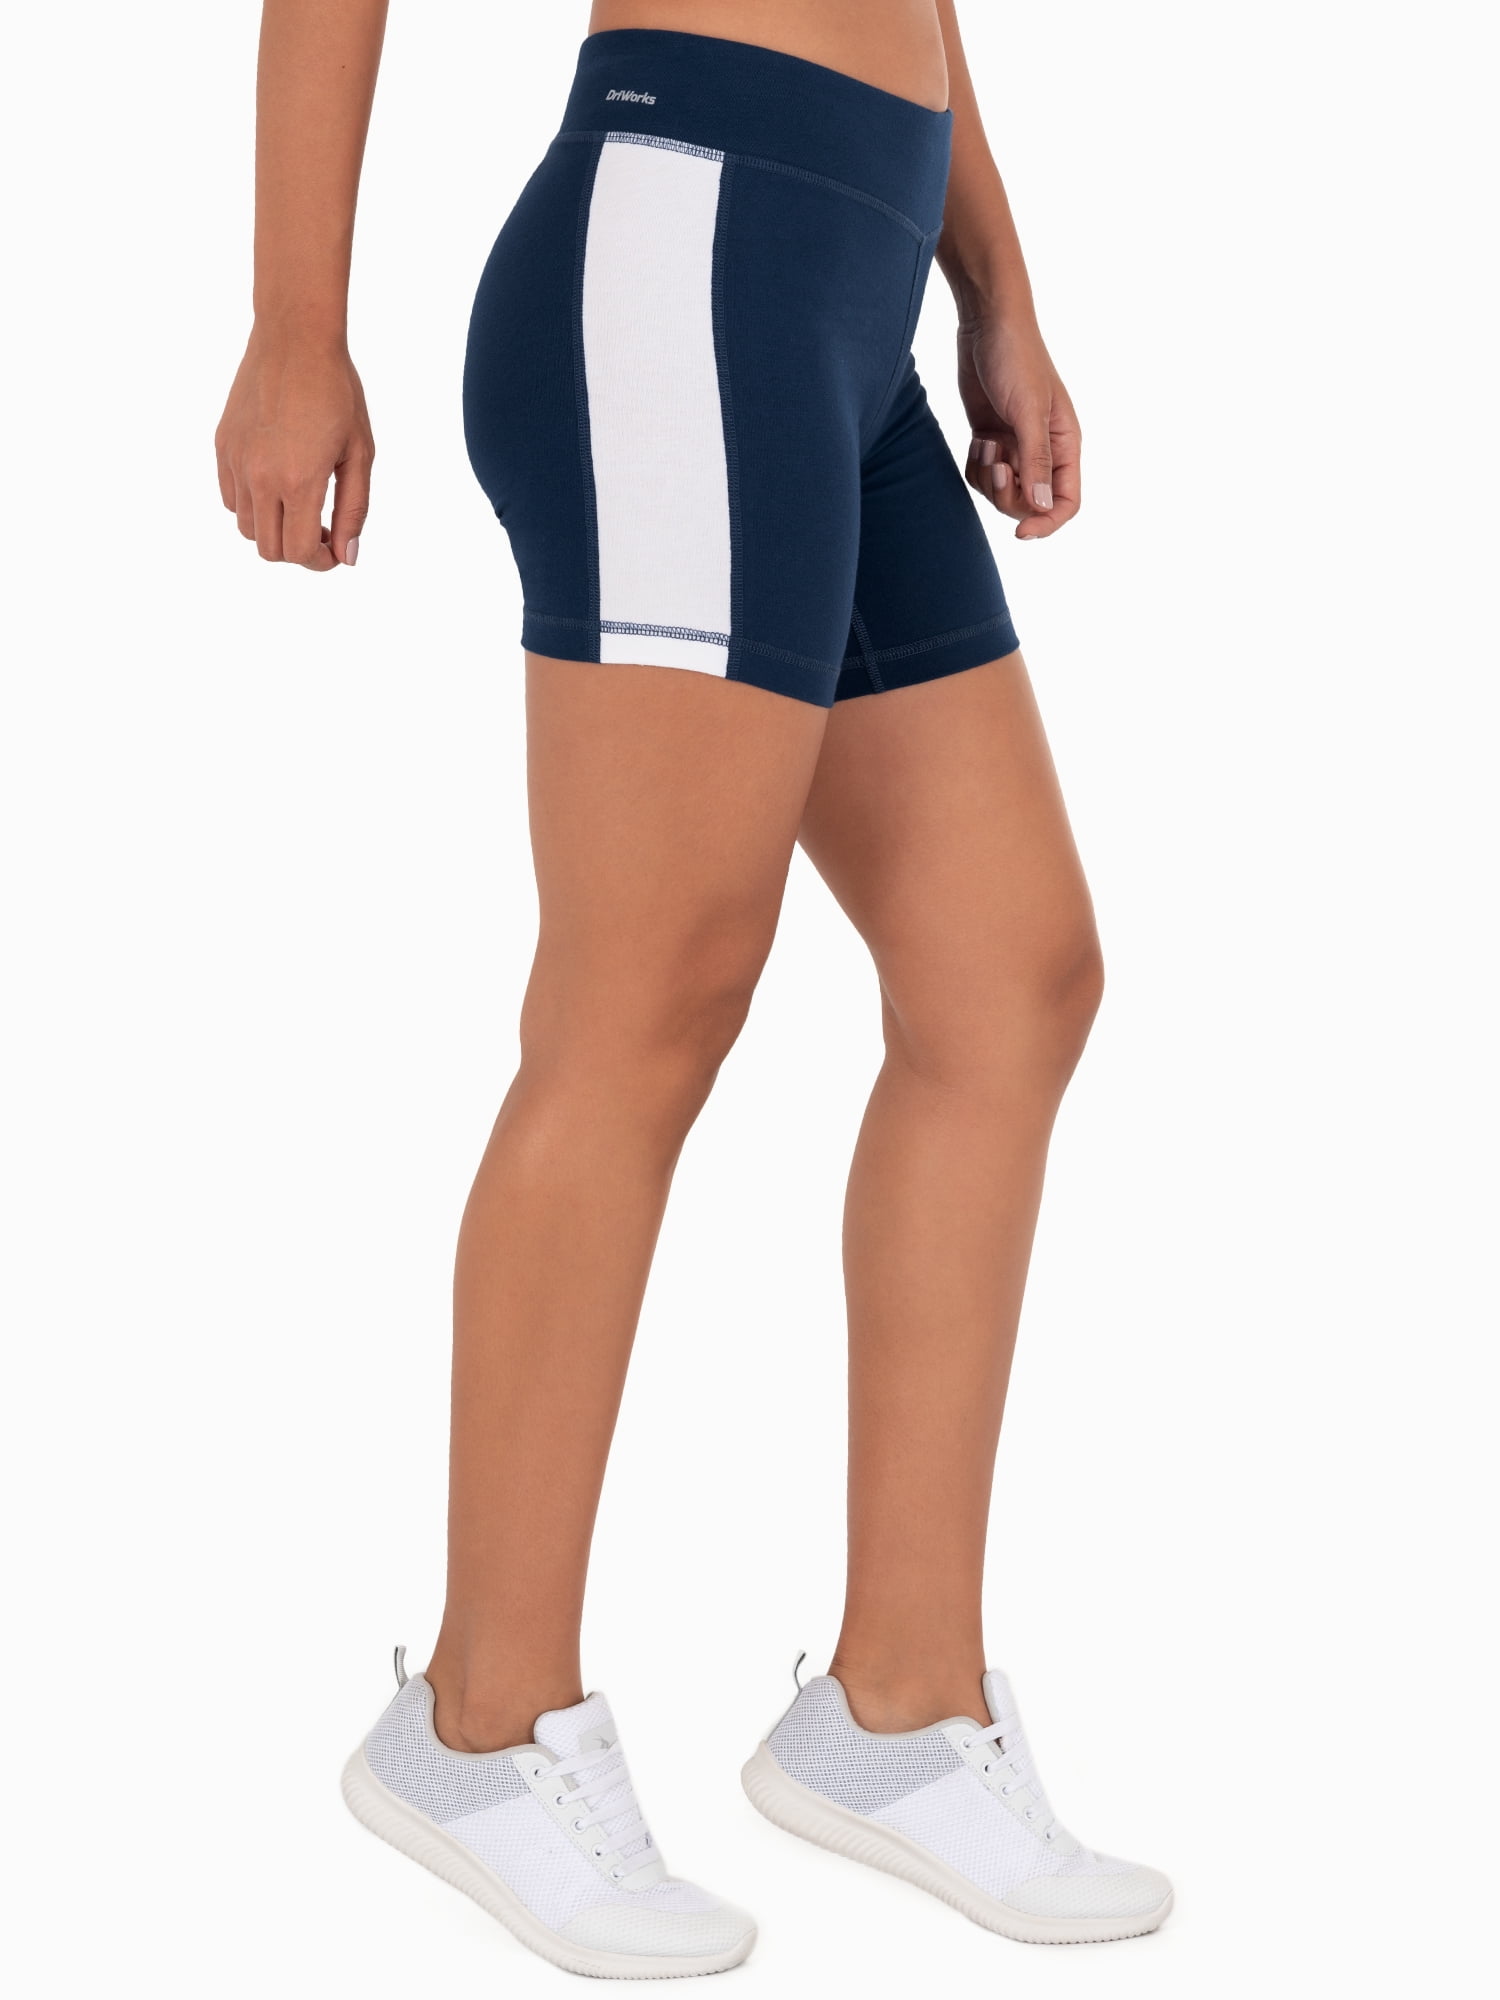 Athletic Works Bike Shorts Walmart Online International Society of Precision Agriculture